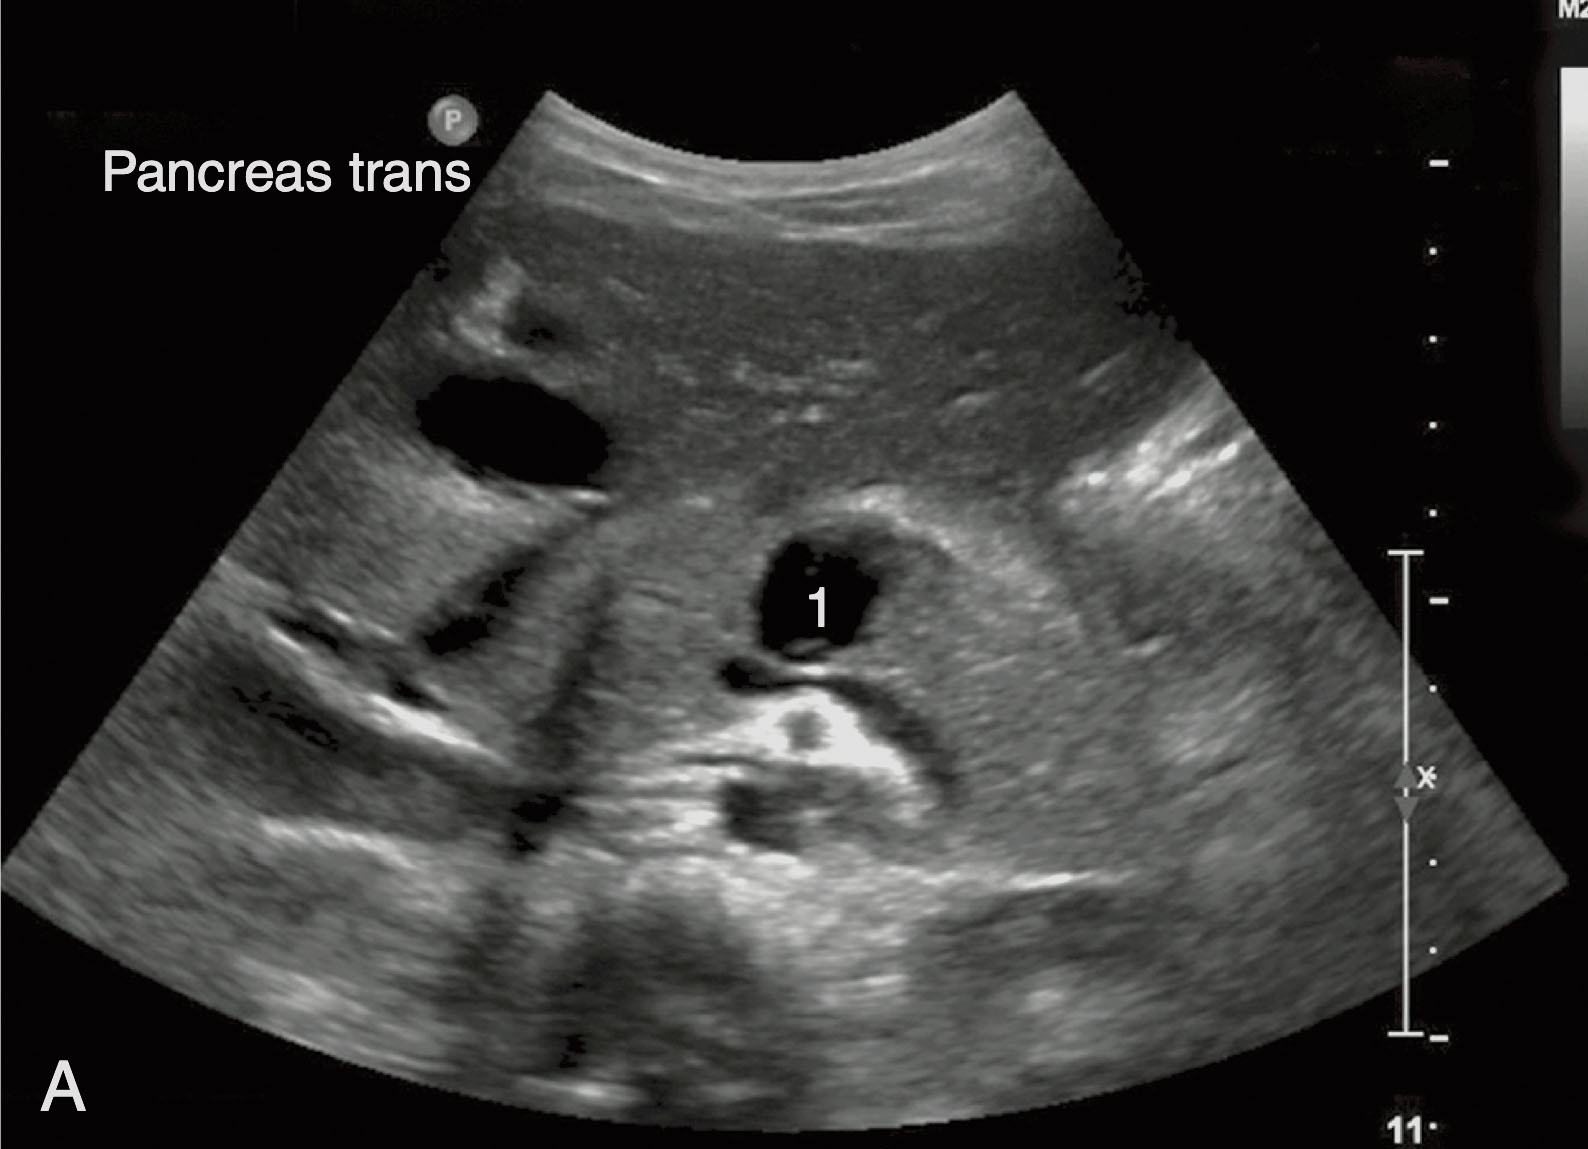 Fig. 25.7, Transected pancreas from trauma.